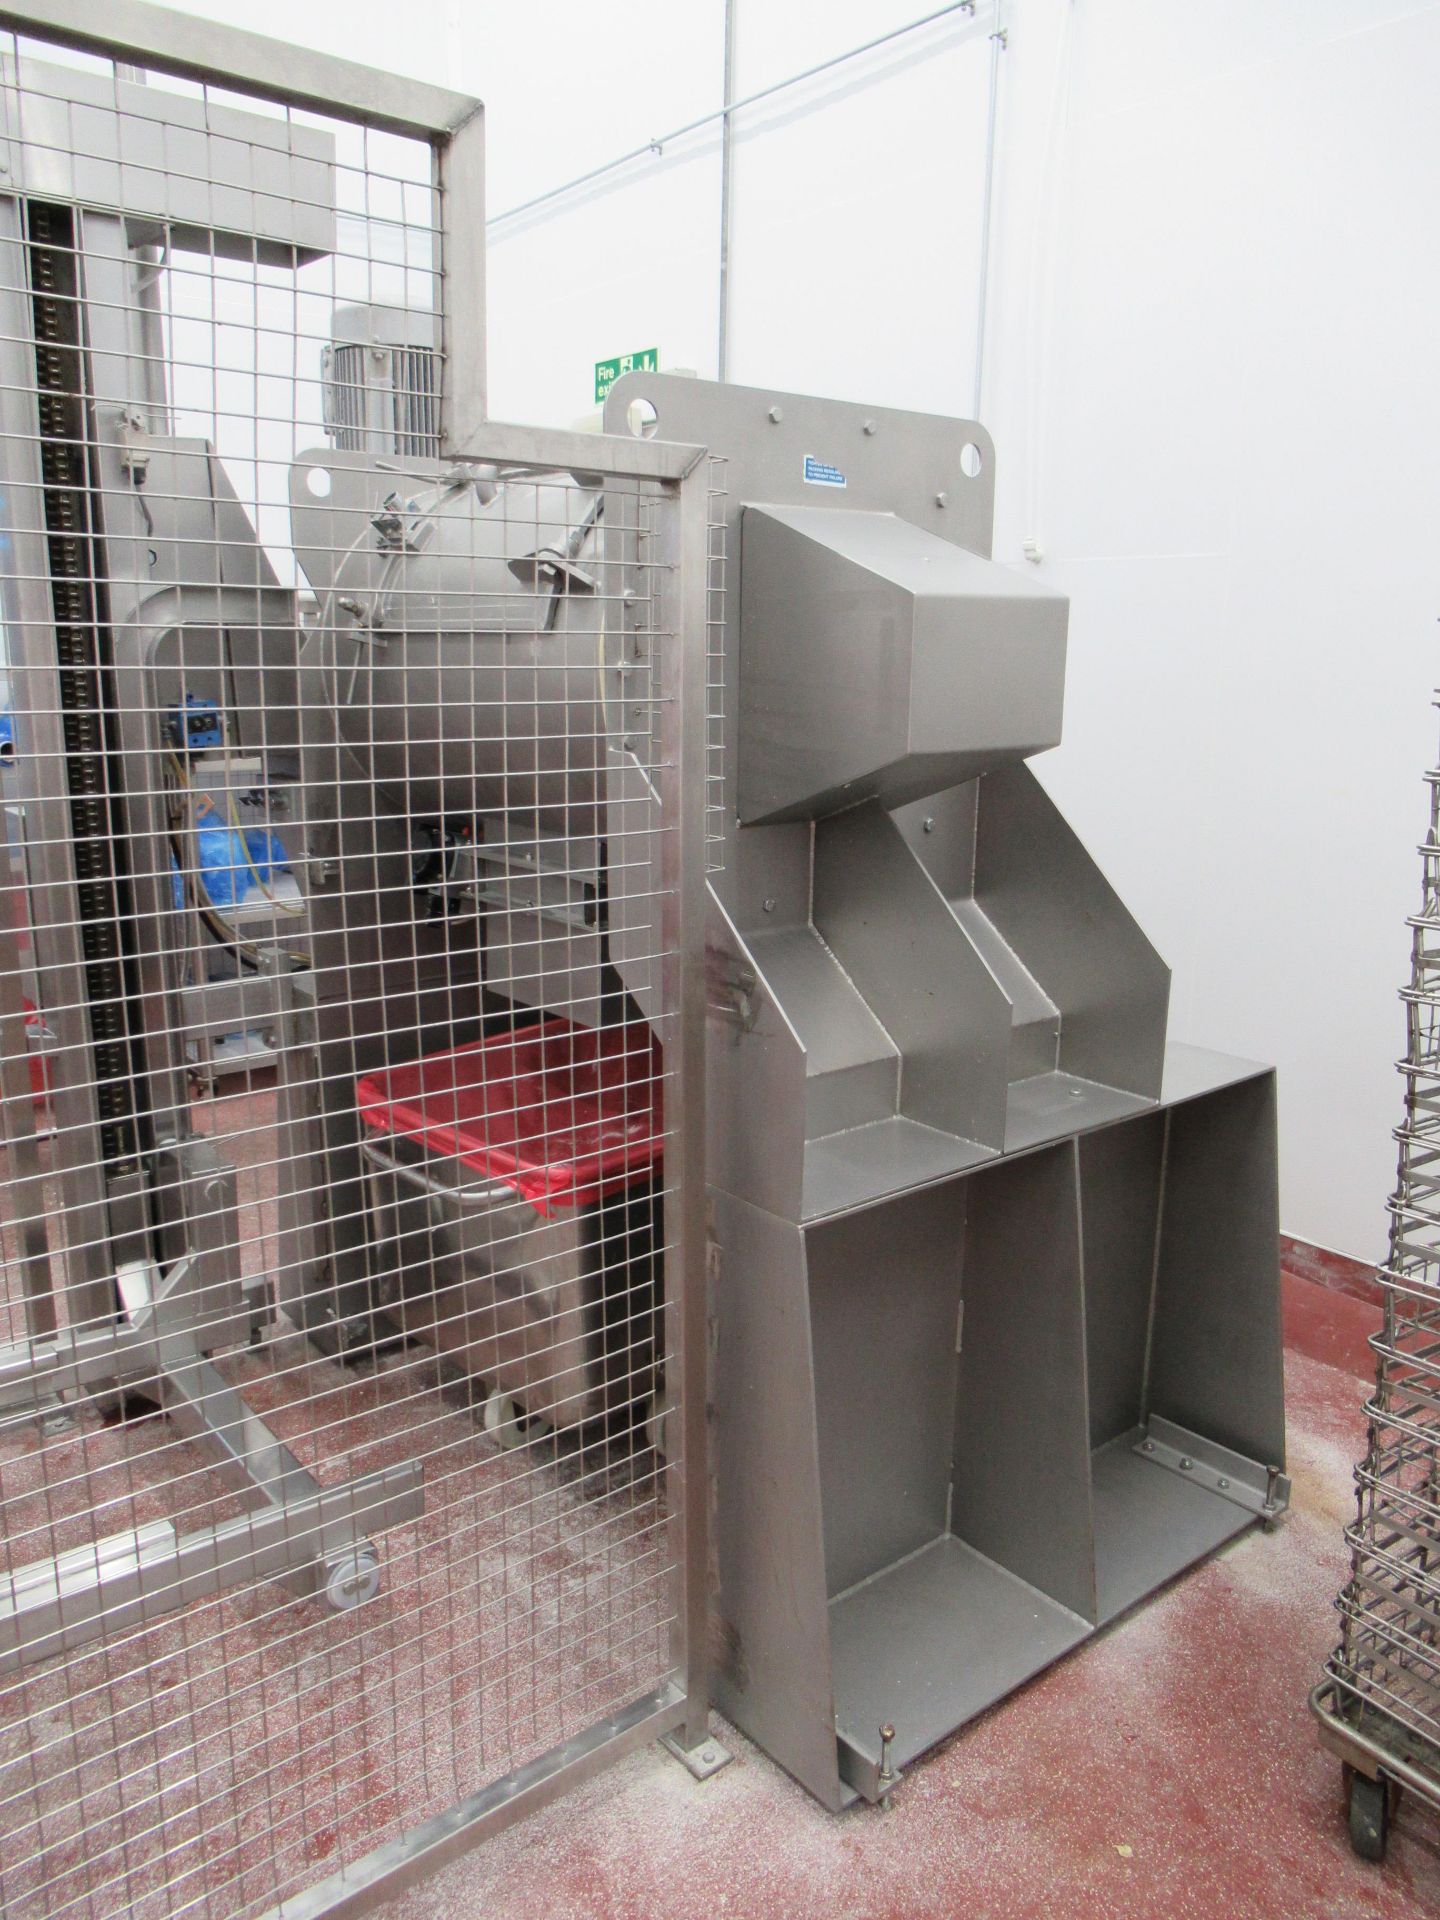 Winkworth RT200 stainless steel mixer Serial no: 16497 (2001) tare weight 1080kg, with fixed Base - Image 6 of 14